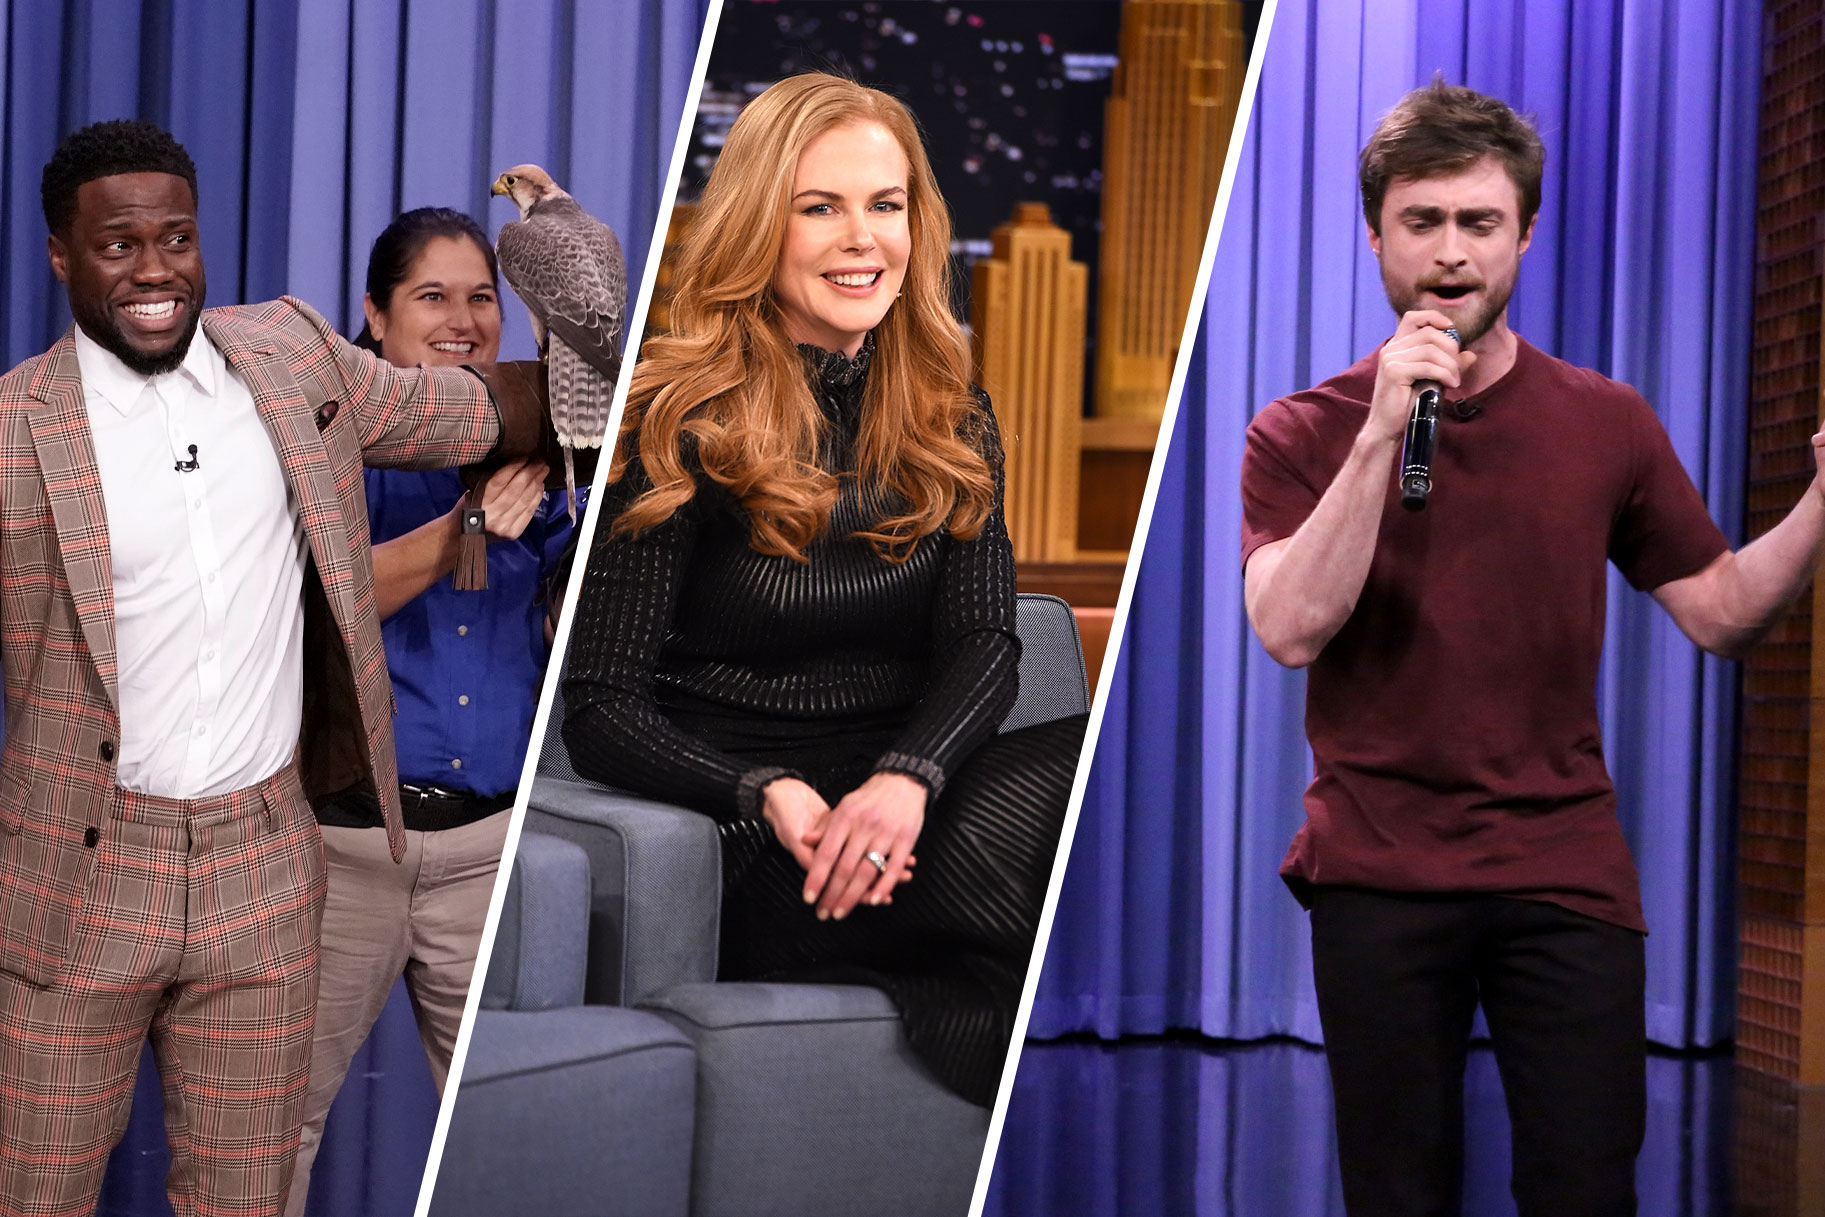 Jimmy Fallon's Best Viral Moments from The Tonight Show